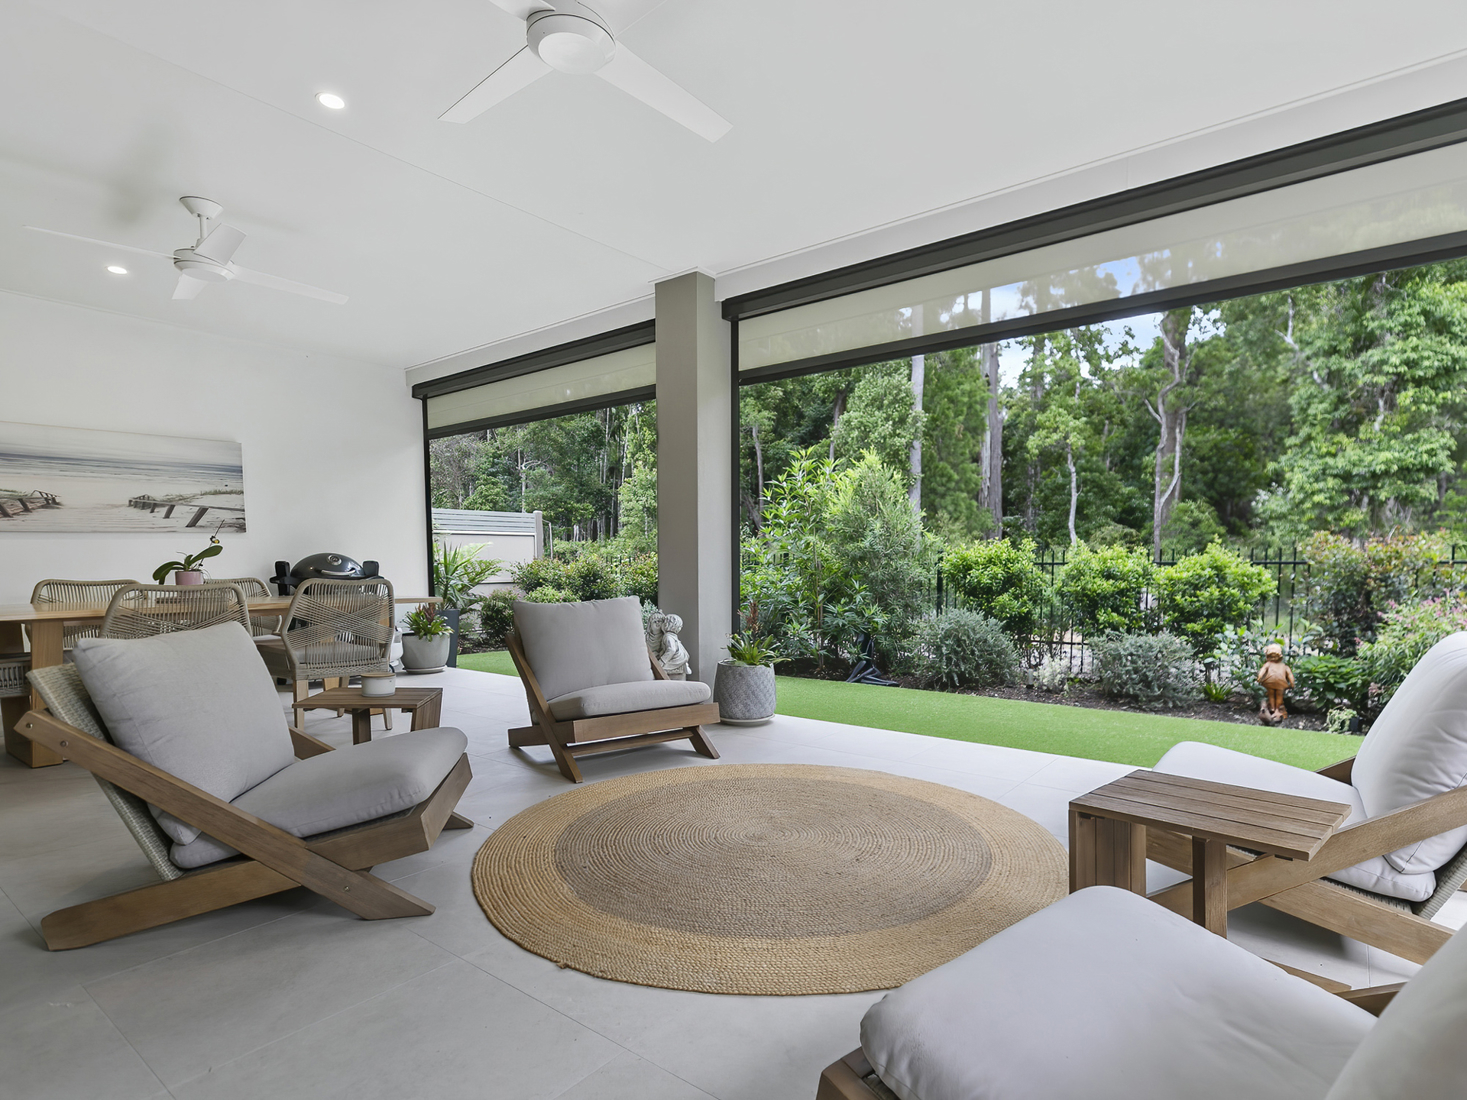 Outdoor covered patio with modern timber lounge setting overlooking lush green garden